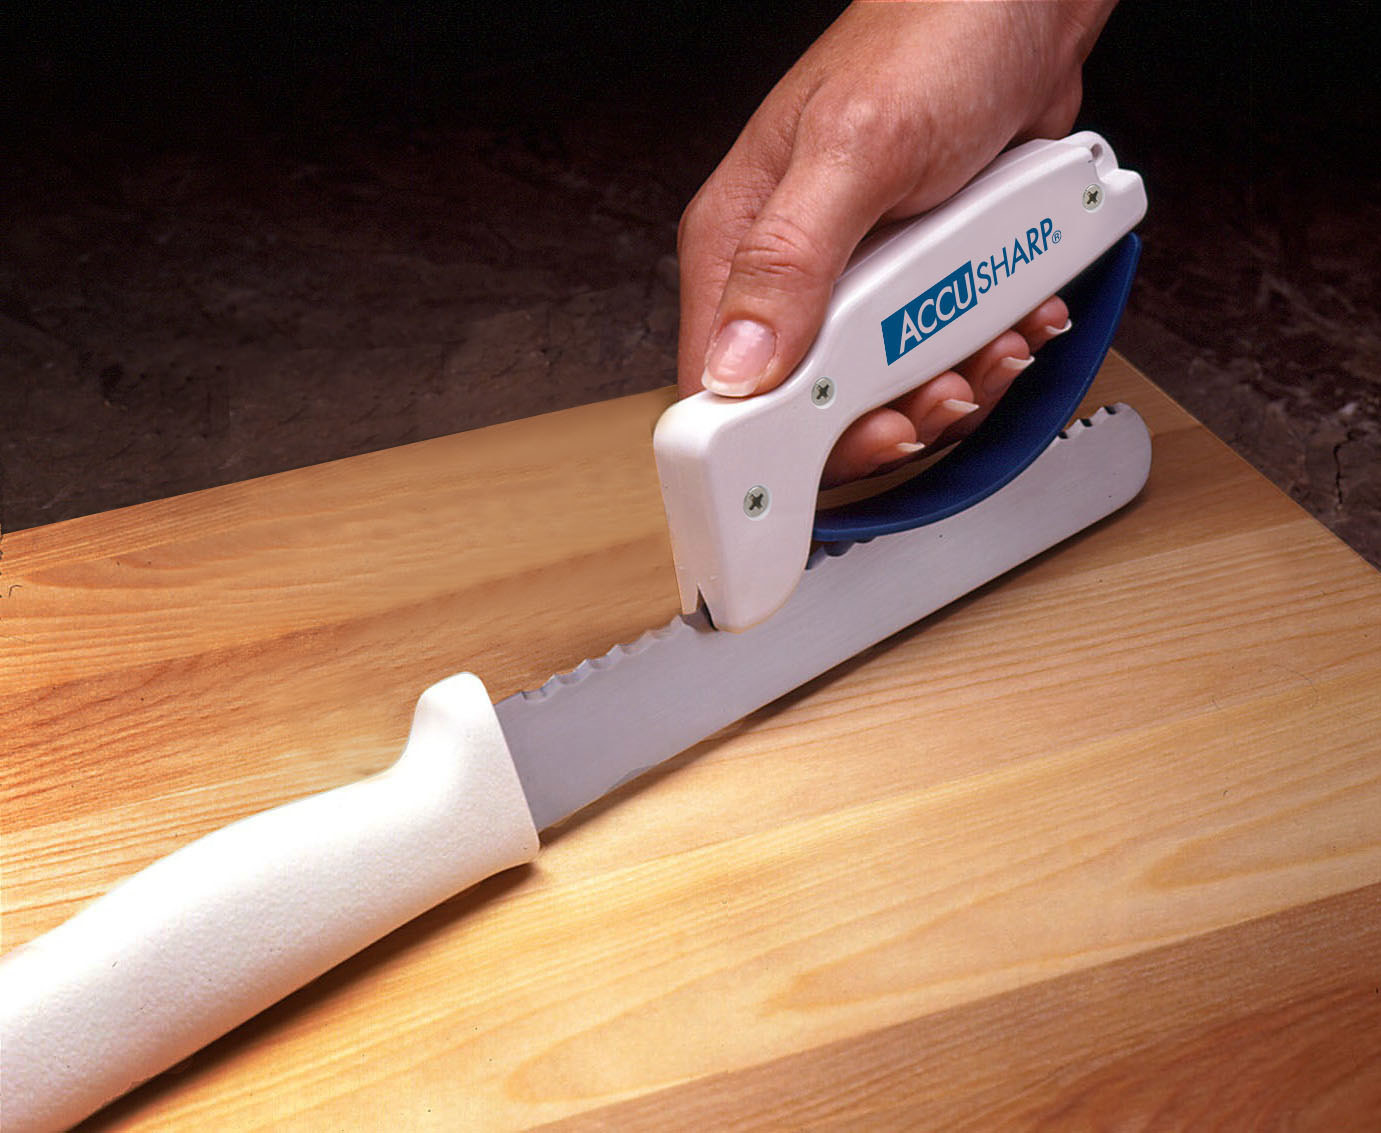 person using an accusharp knife sharpener to sharpen a serrated knife